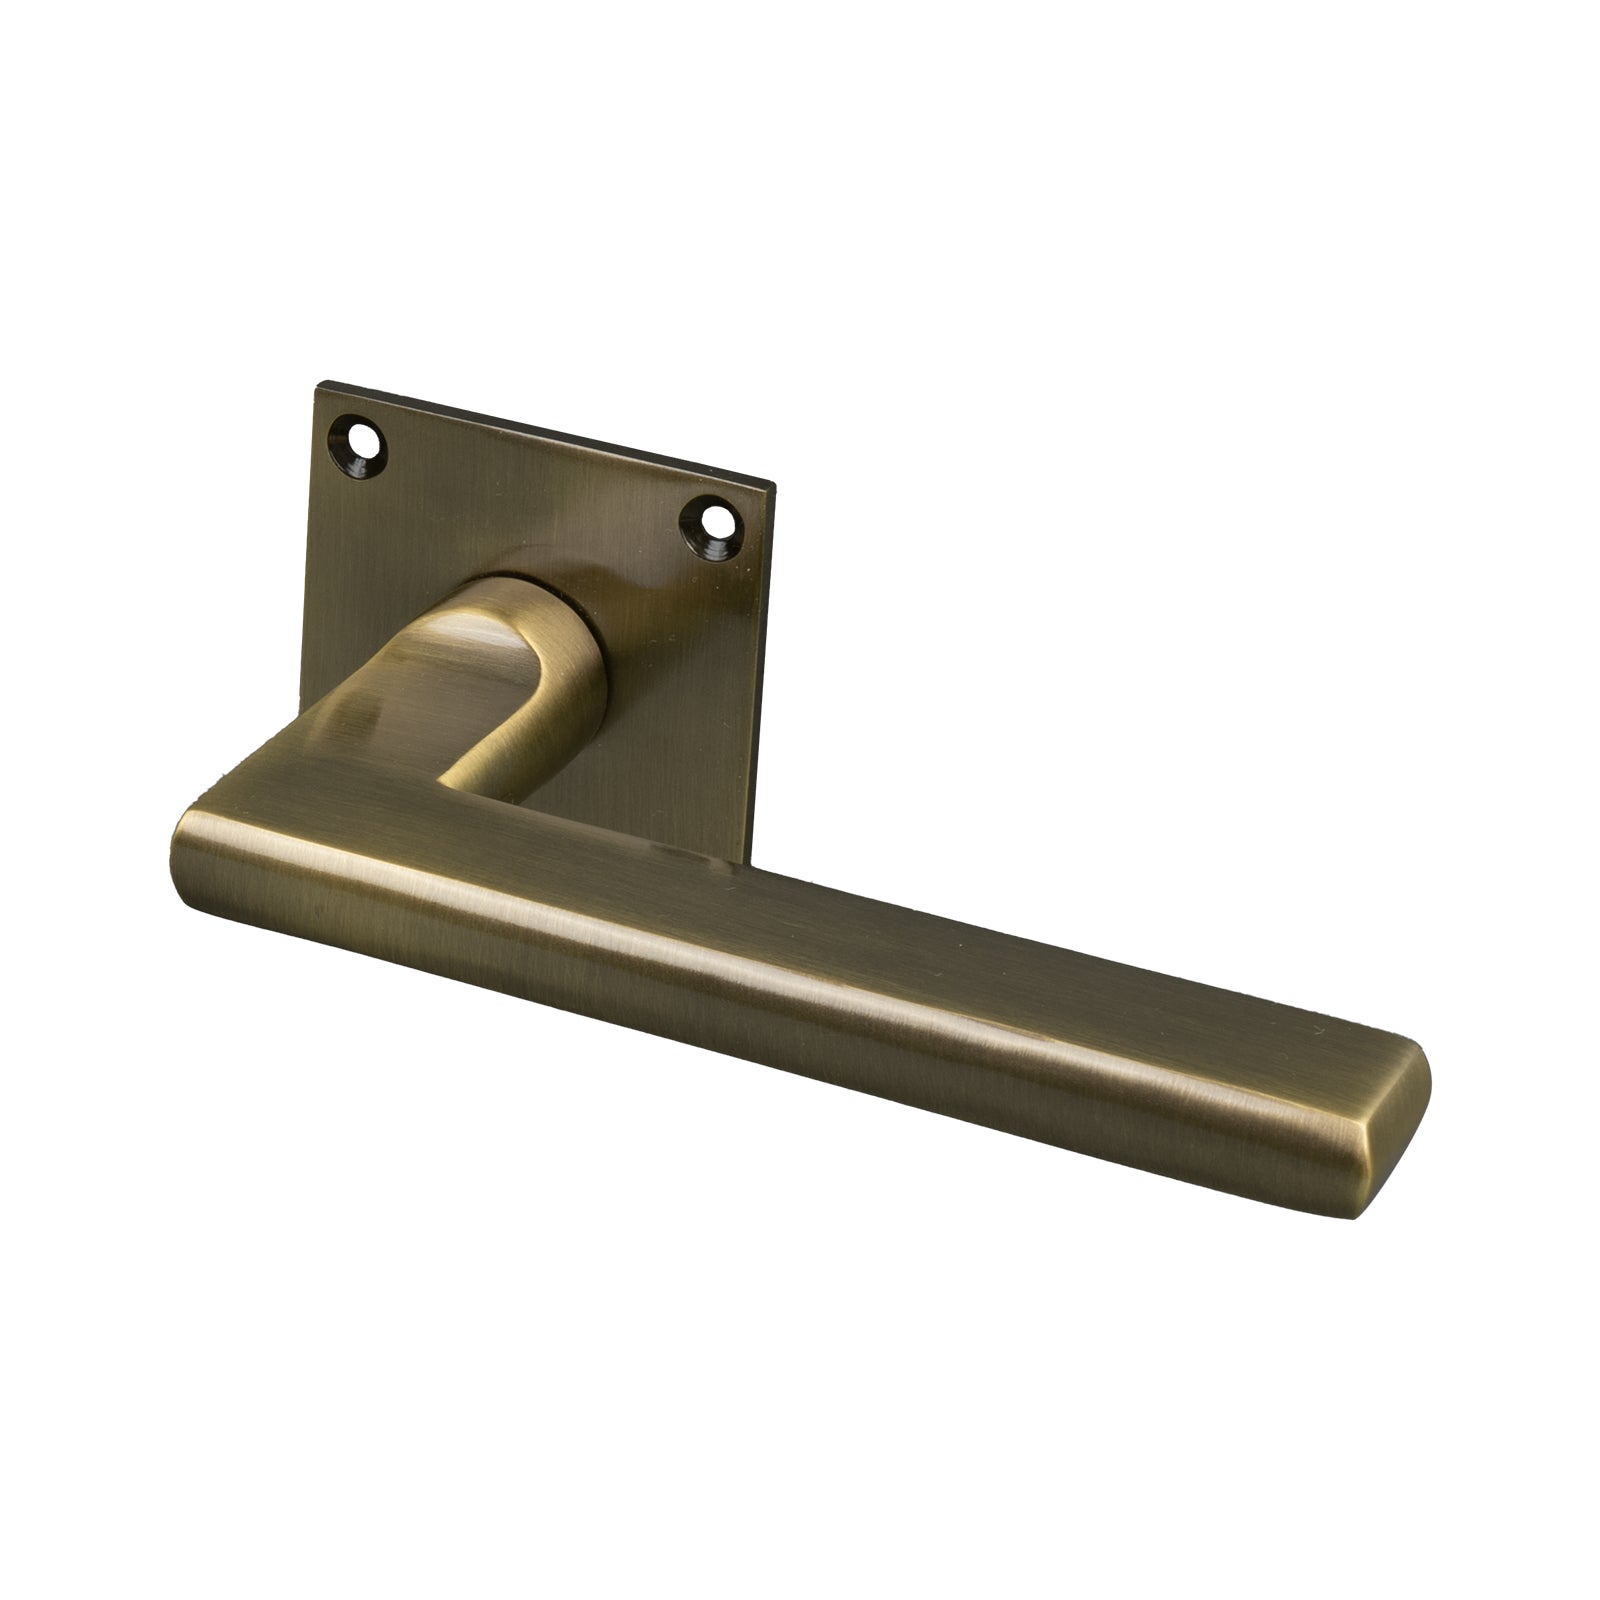 SHOW Trident Square Rose Door Handles - Low Profile with Aged Brass finish